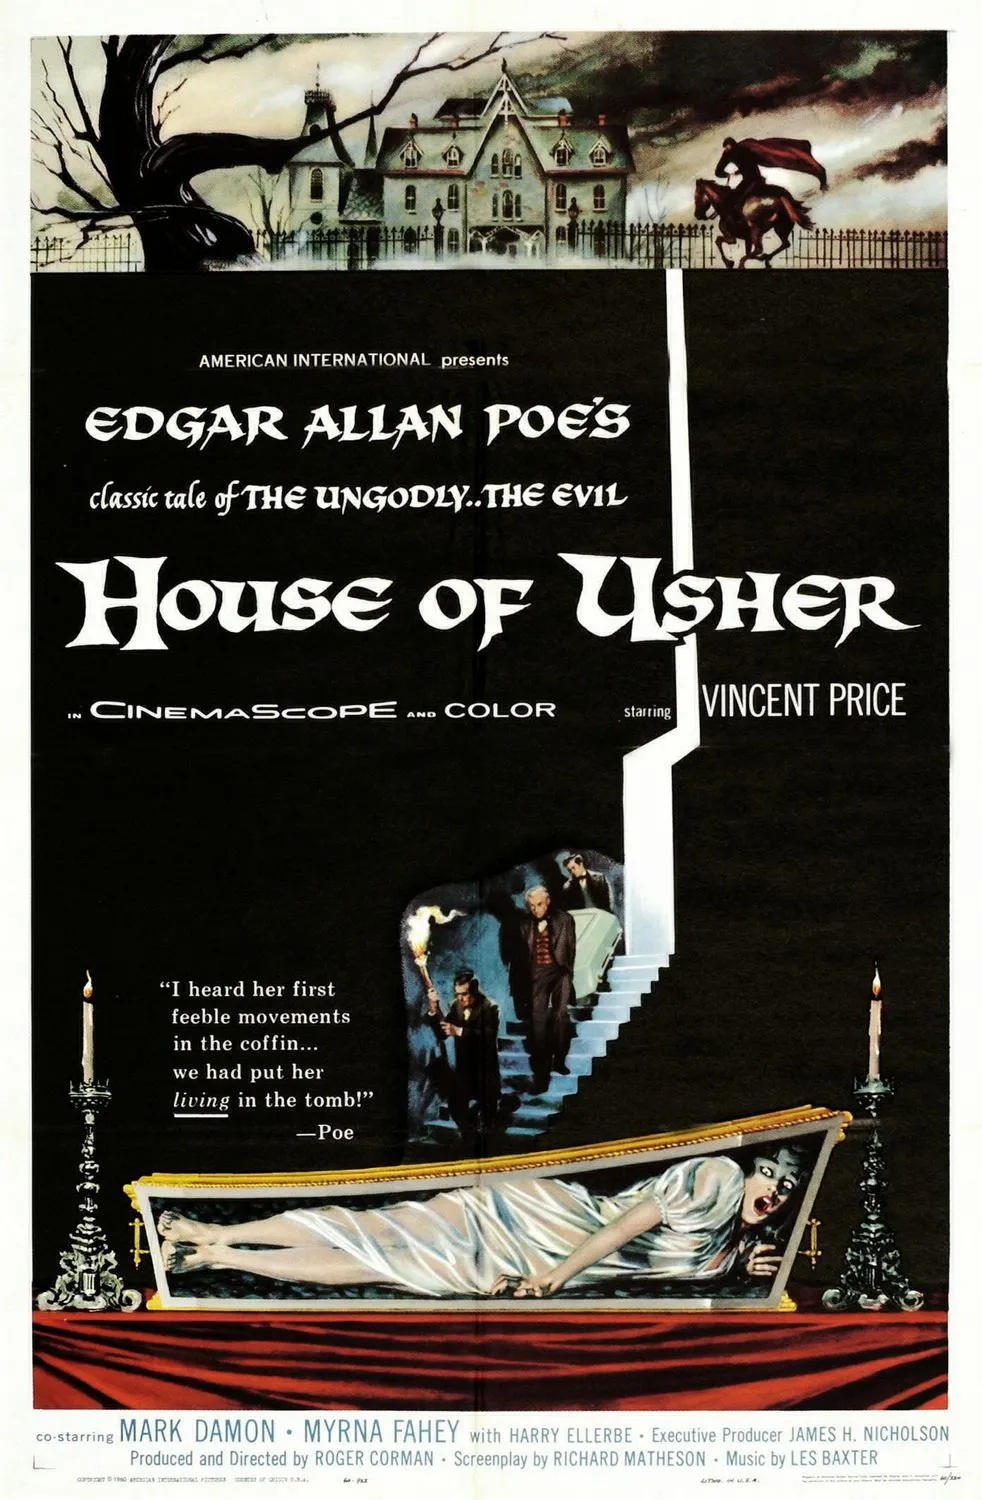 Cinephile Paradiso: The Fall of the House of Usher